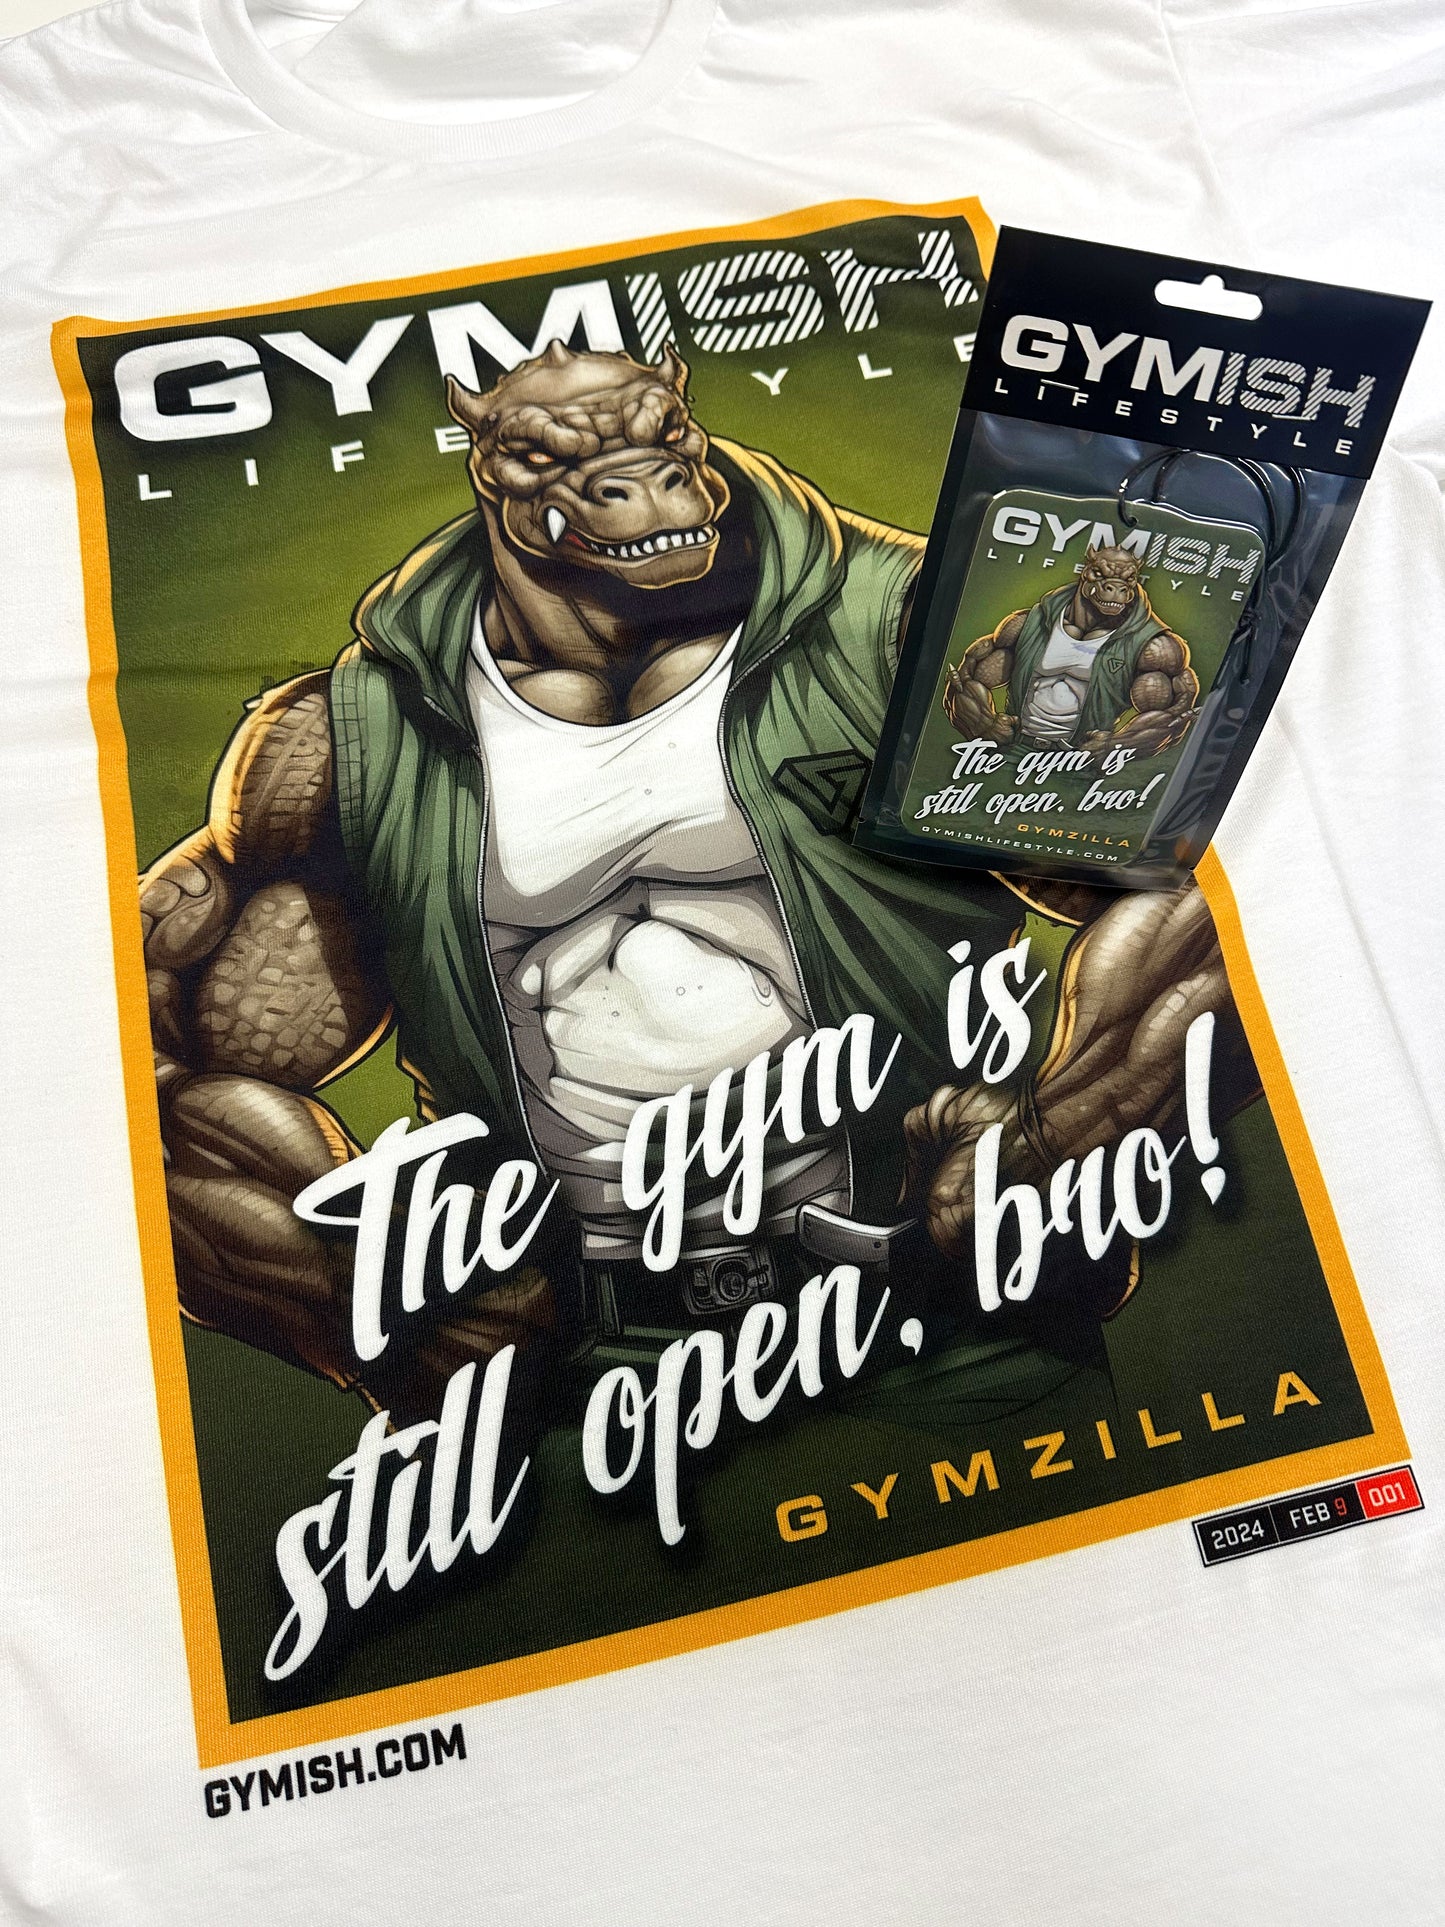 Gymzilla Gym Still Open Workout Gym Shirts for Men with Air Freshener Gift Set